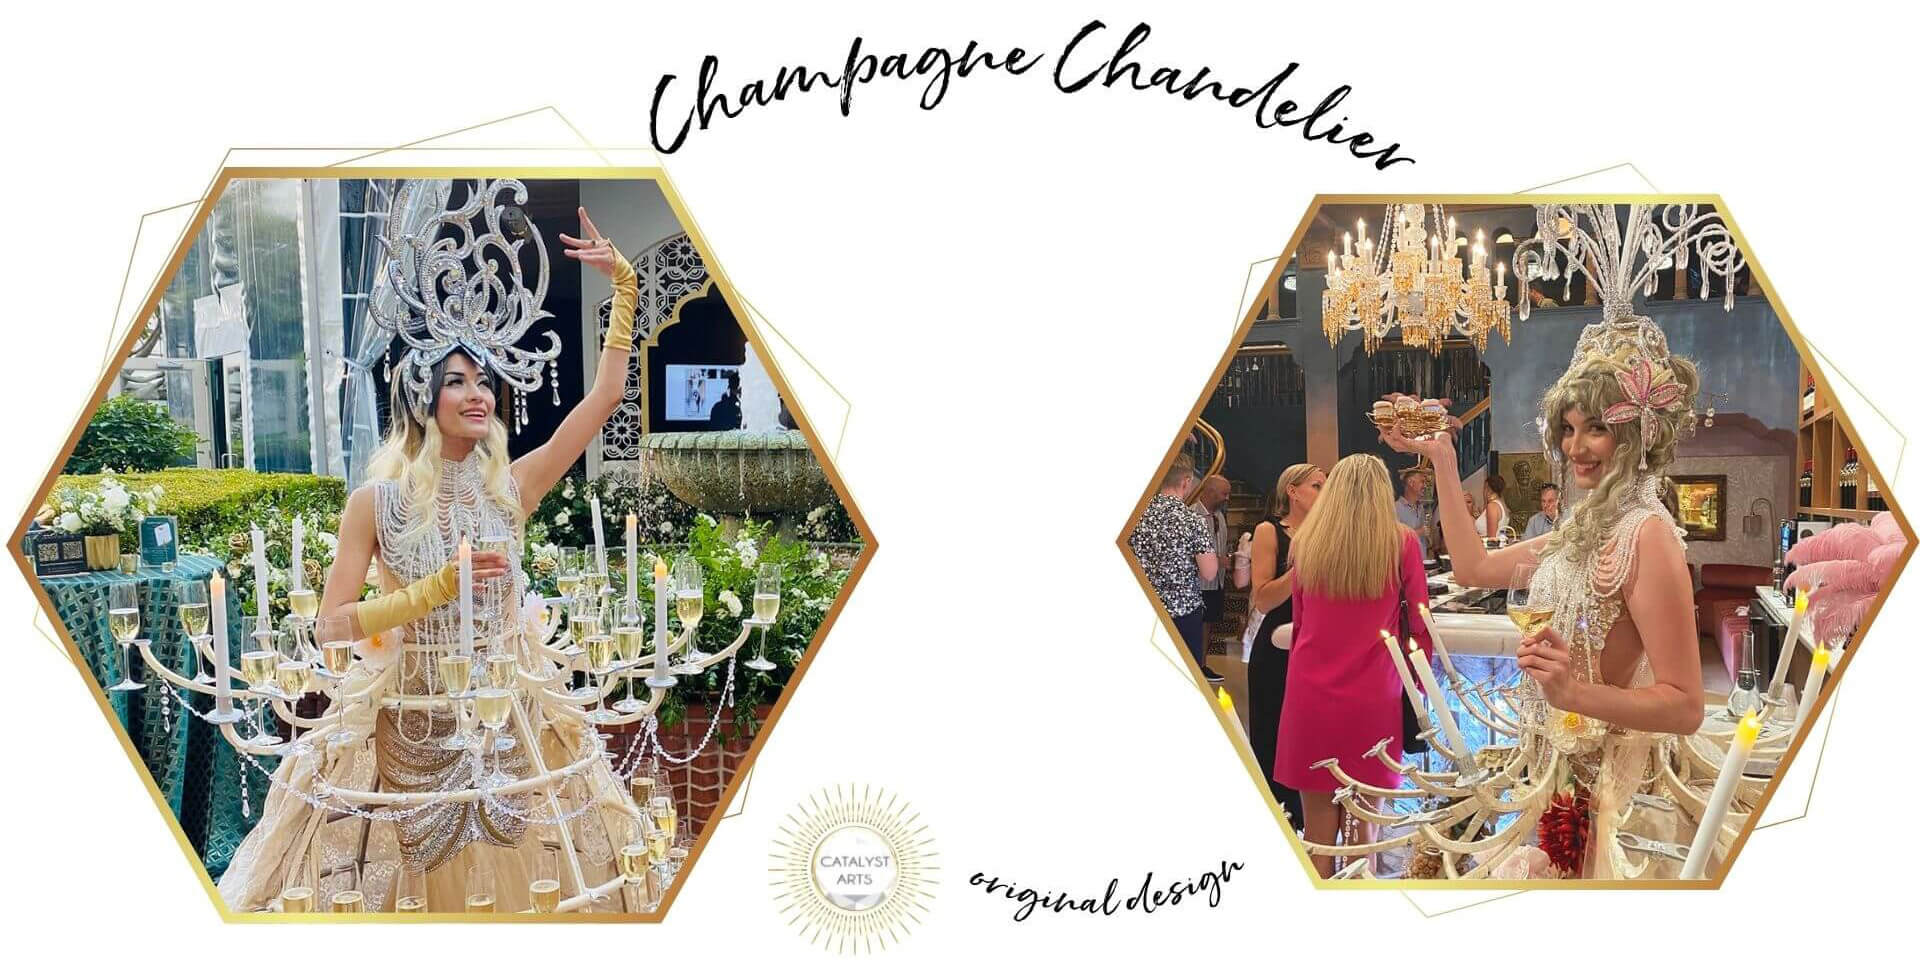 Champagne Chandelier Dress Hostess- original hospitality entertainer creation of Catalyst Arts in California 